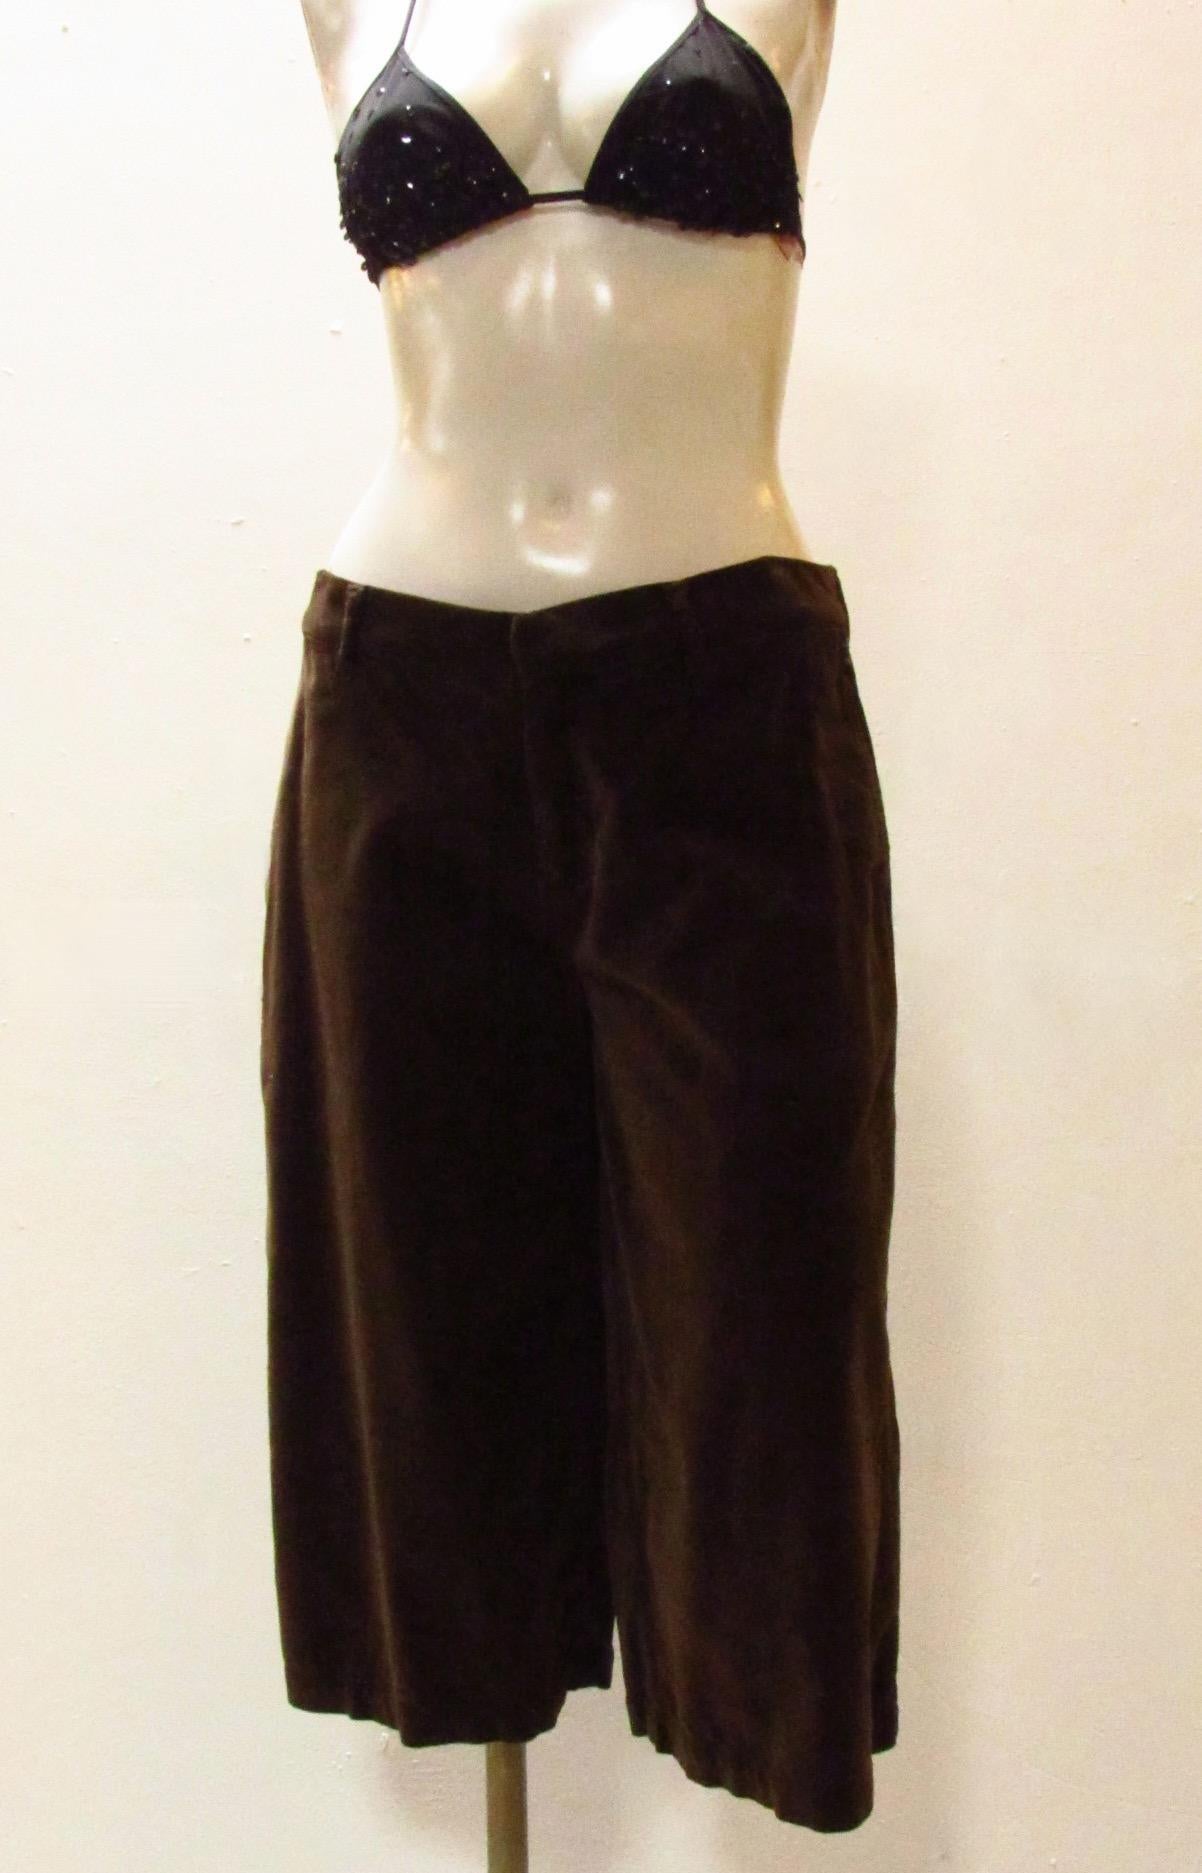 Chocolatey brown velvet knee length shorts from vintage Jean Paul Gaultier. Two slit side pockets as well as two back pockets adorned with embroidery. A buckle at back allows you to cinch fabric for fit. 